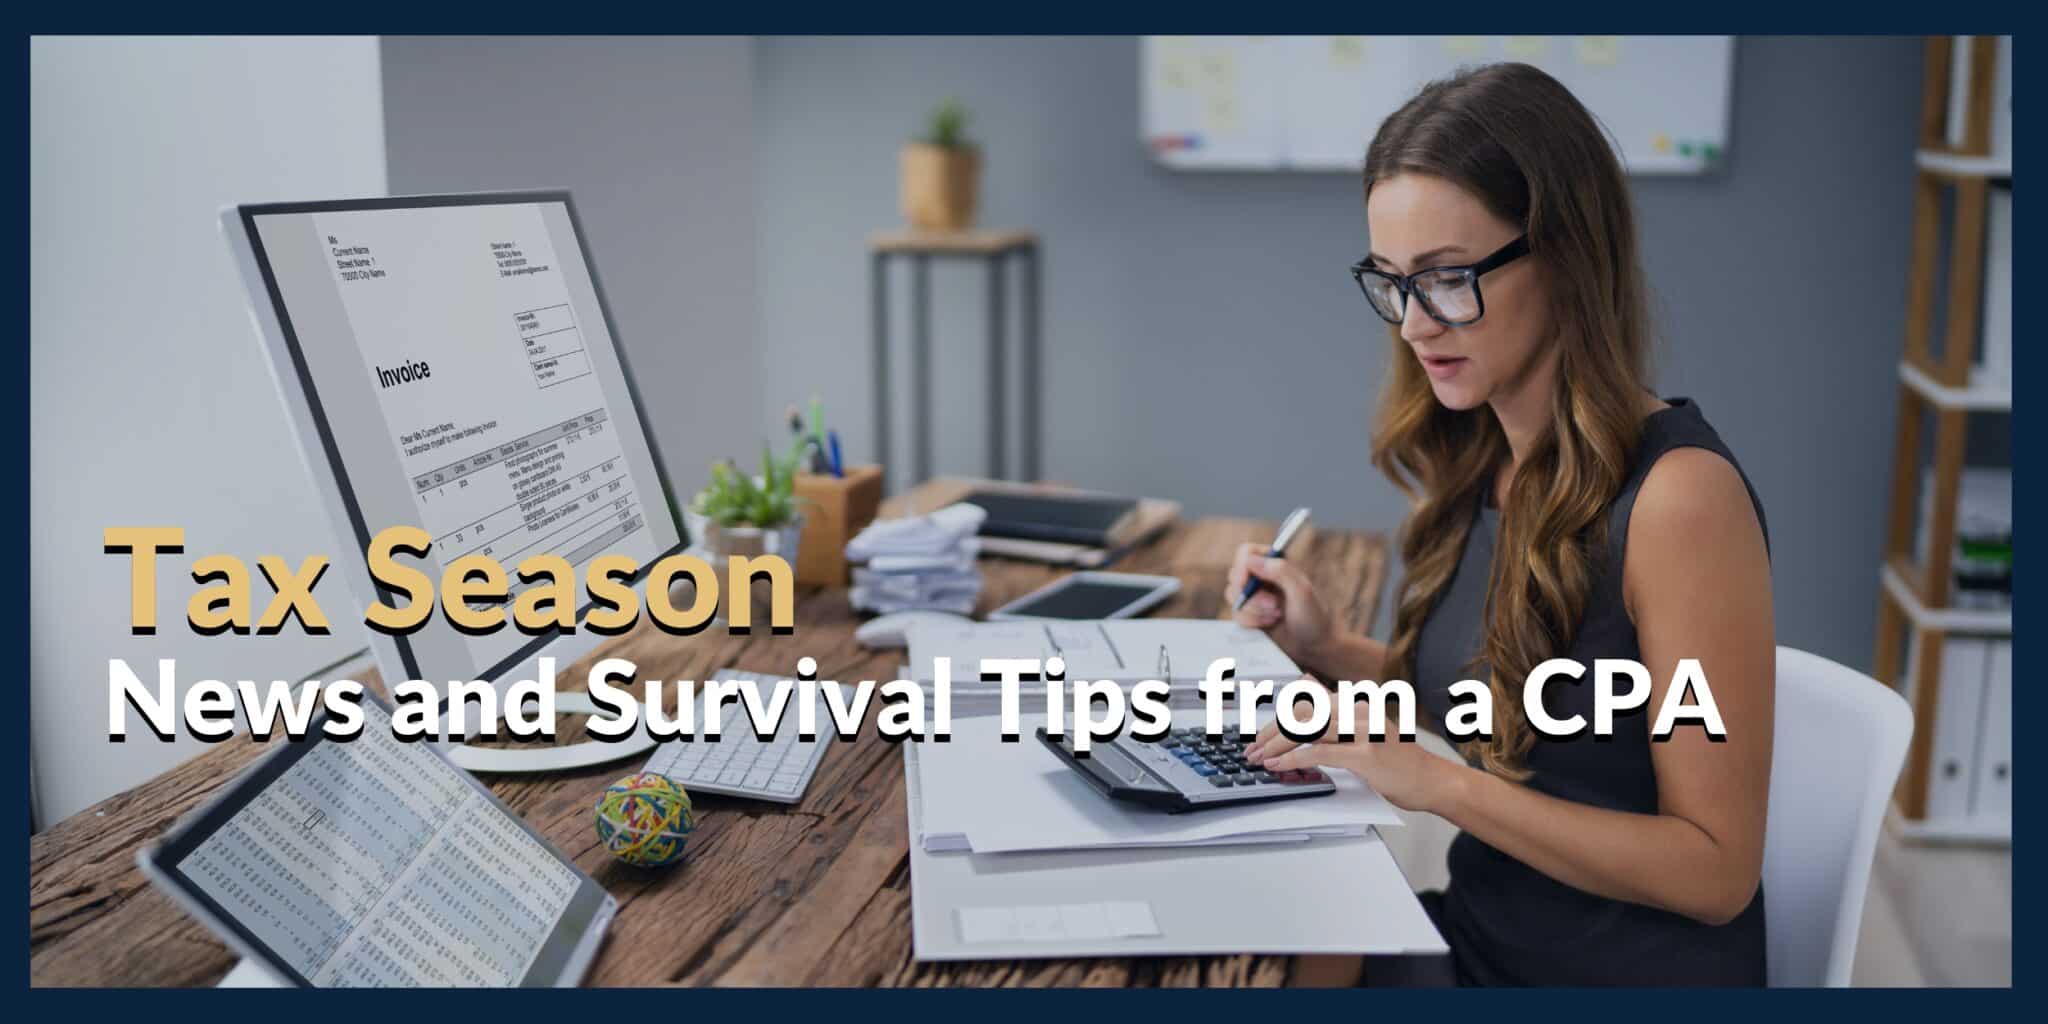 Tax Season News and Survival Tips from a CPA